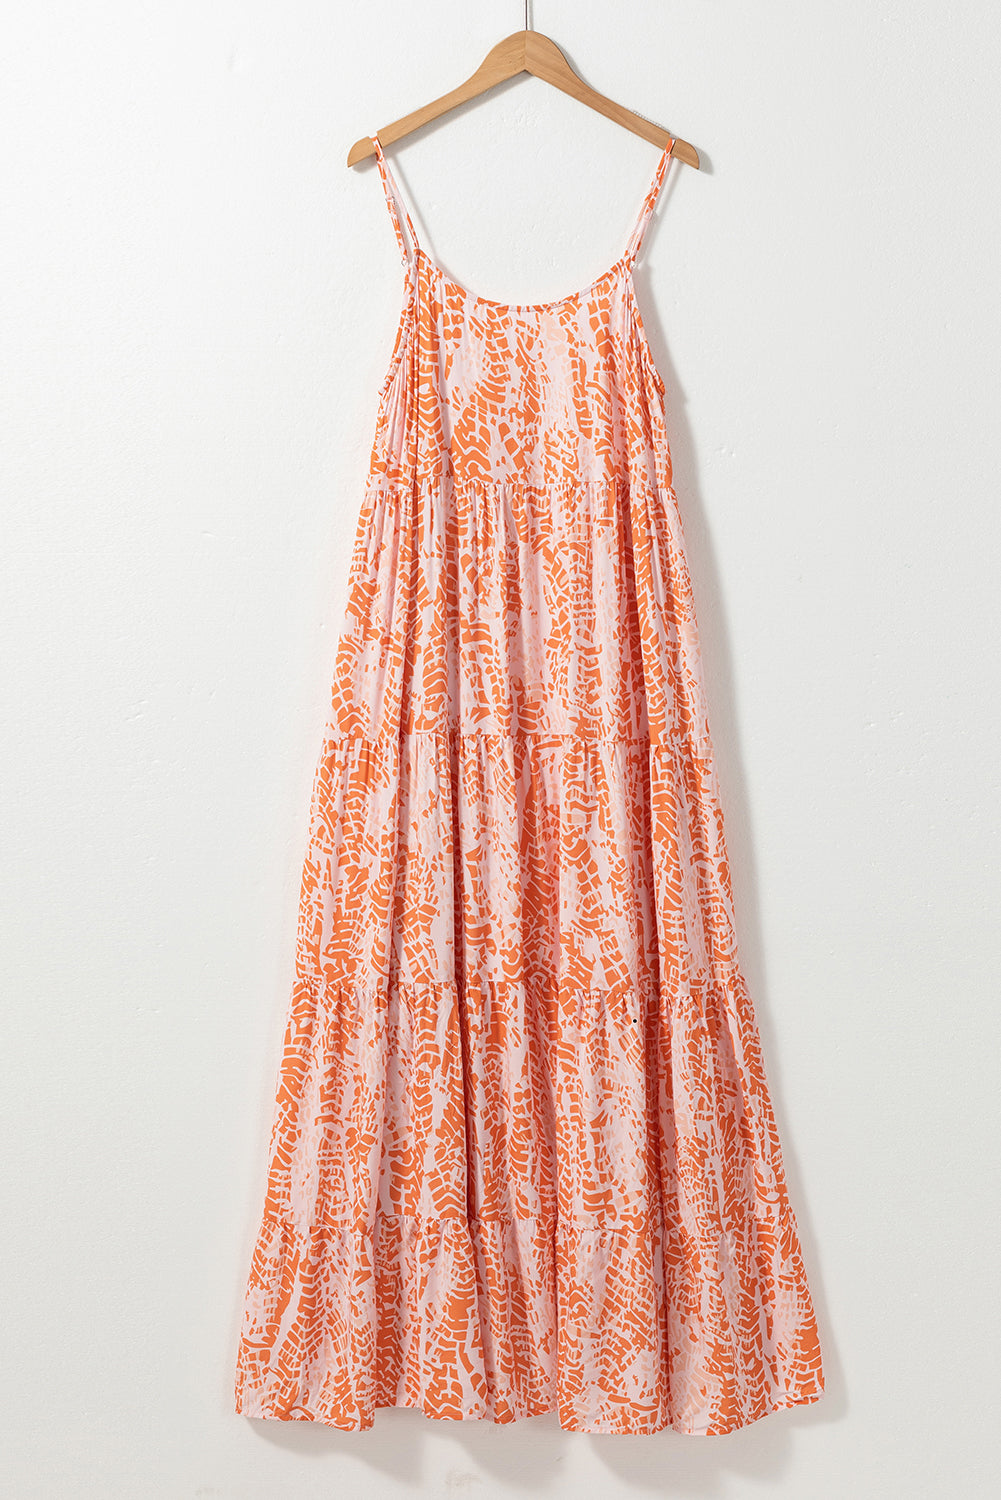 Orange Abstract Print Spaghetti Straps Backless Tiered Maxi Dress-5